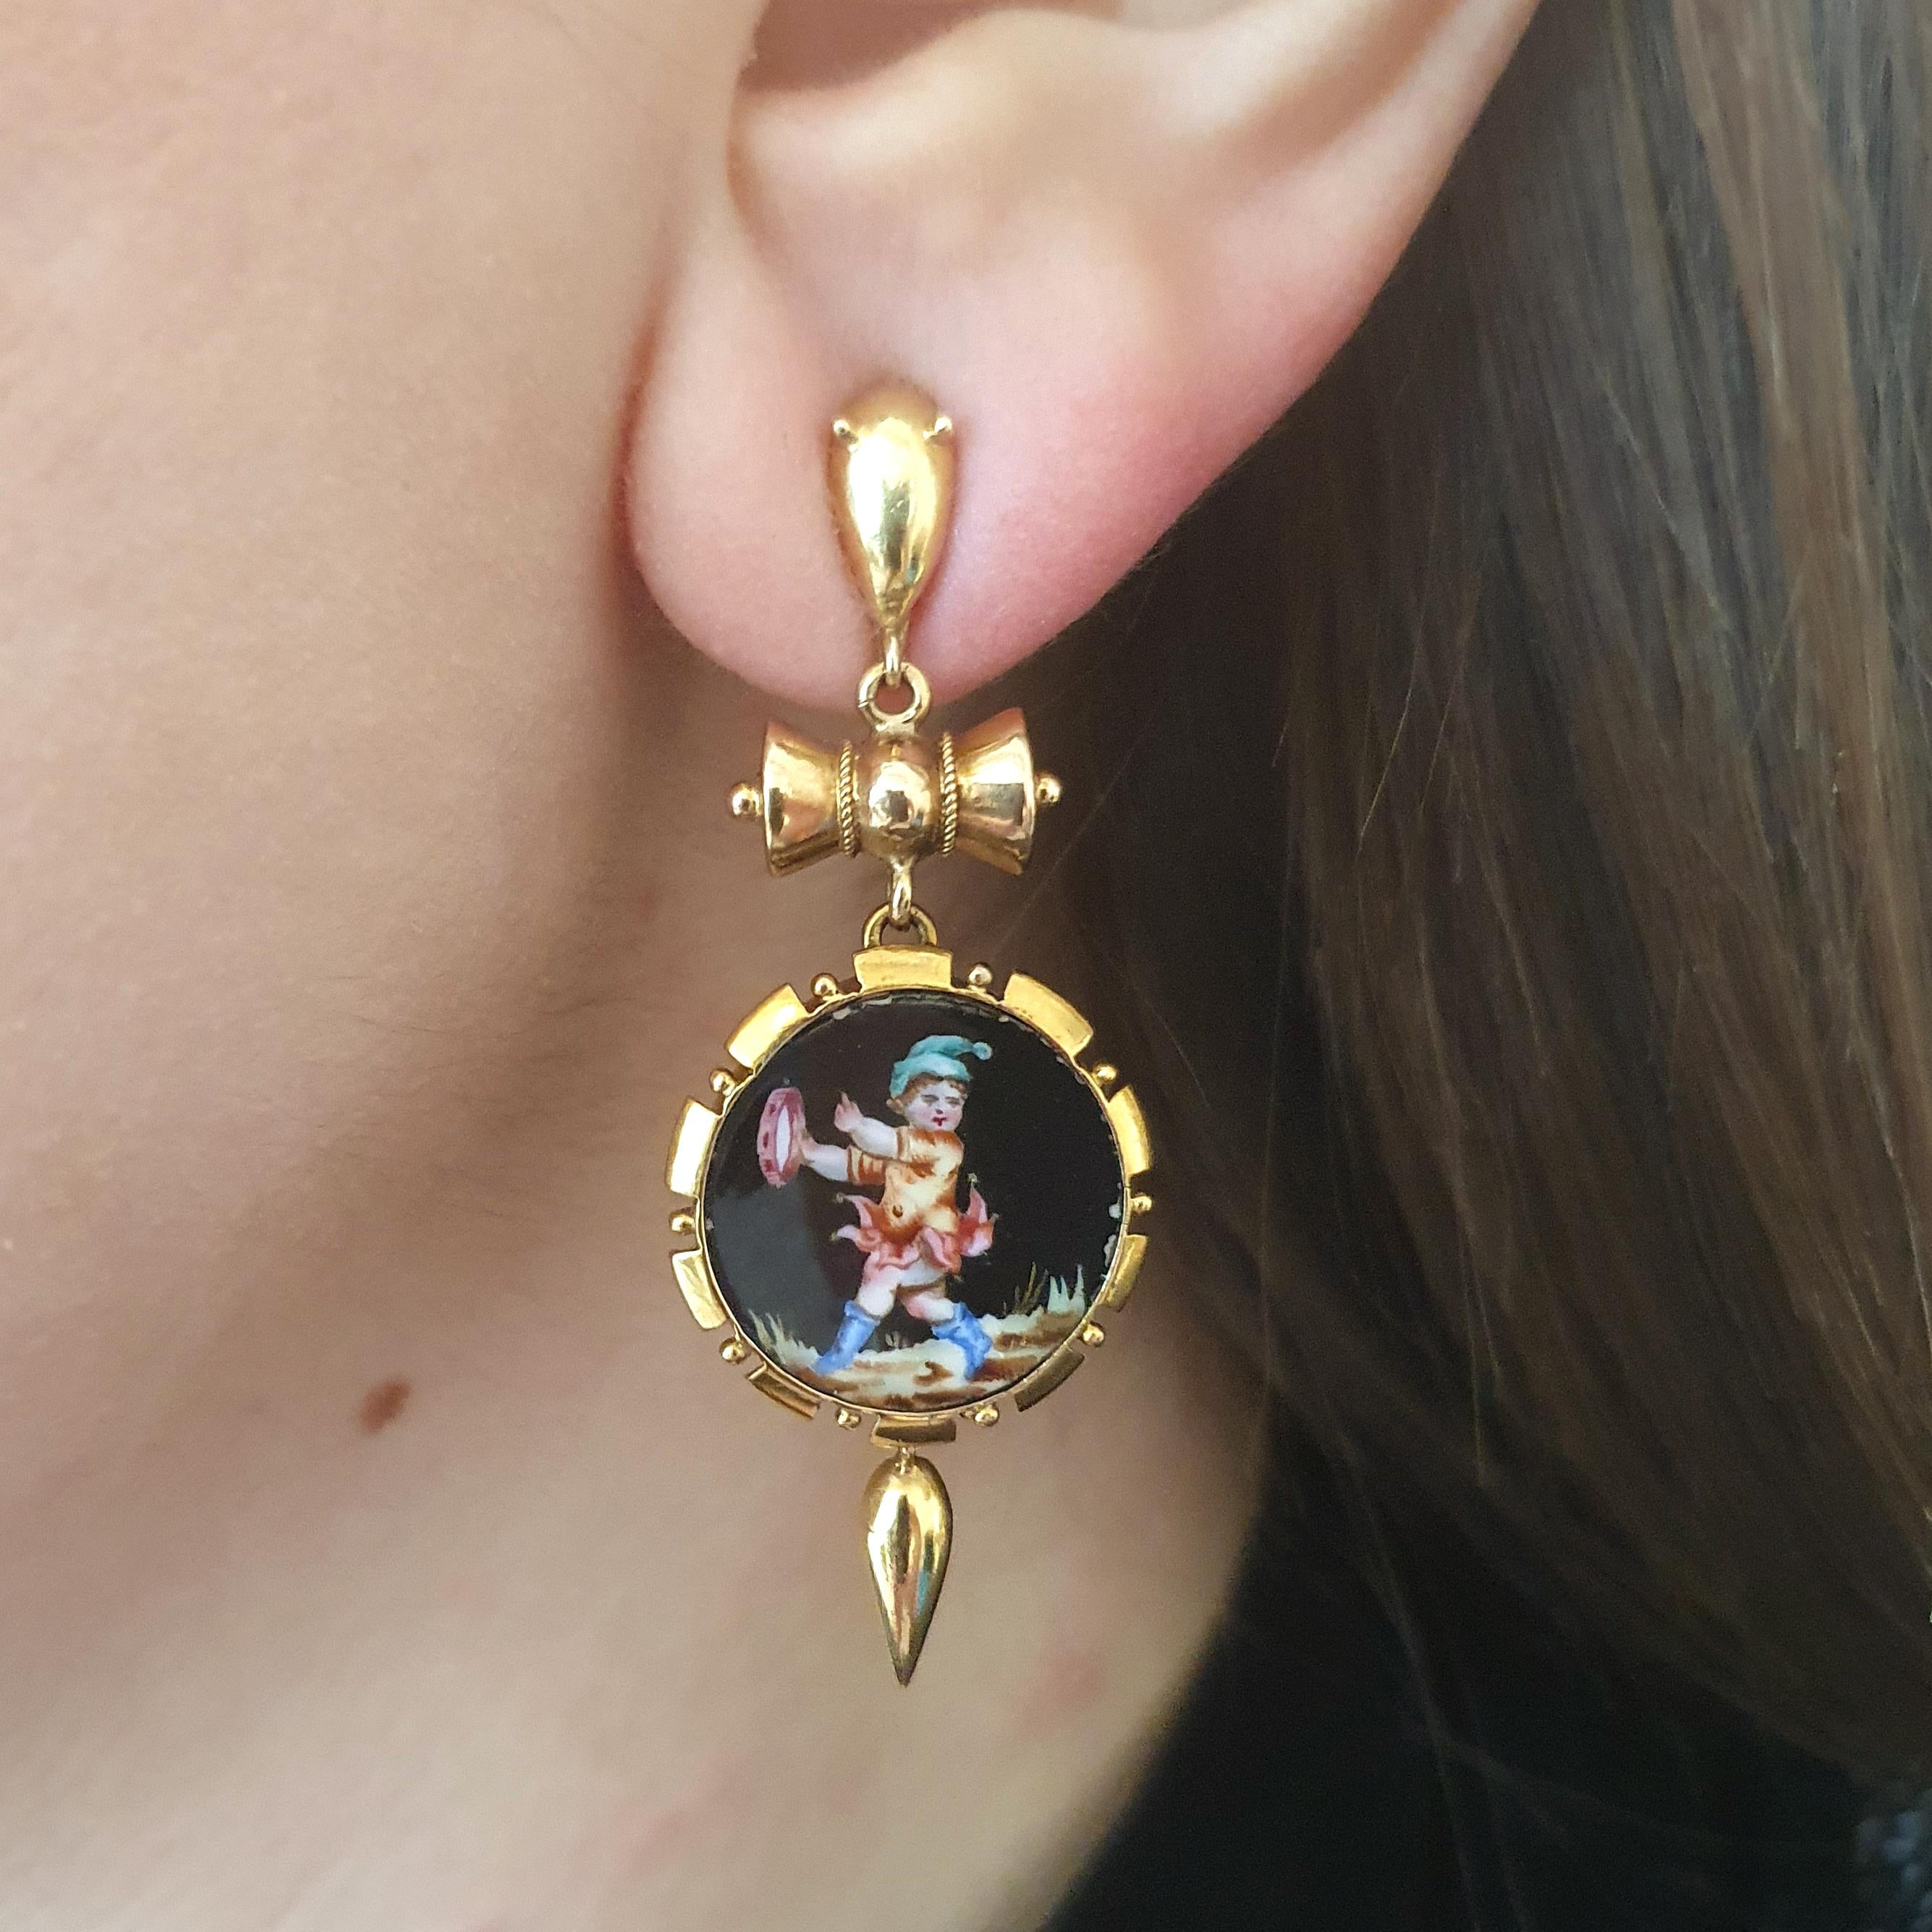 Lovely earrings holding folklore characters on porcelain mounted on yellow gold.

Total weight: 7.24 grams
Total lenght: 5.20 cm
Width max. : 2.00cm 
